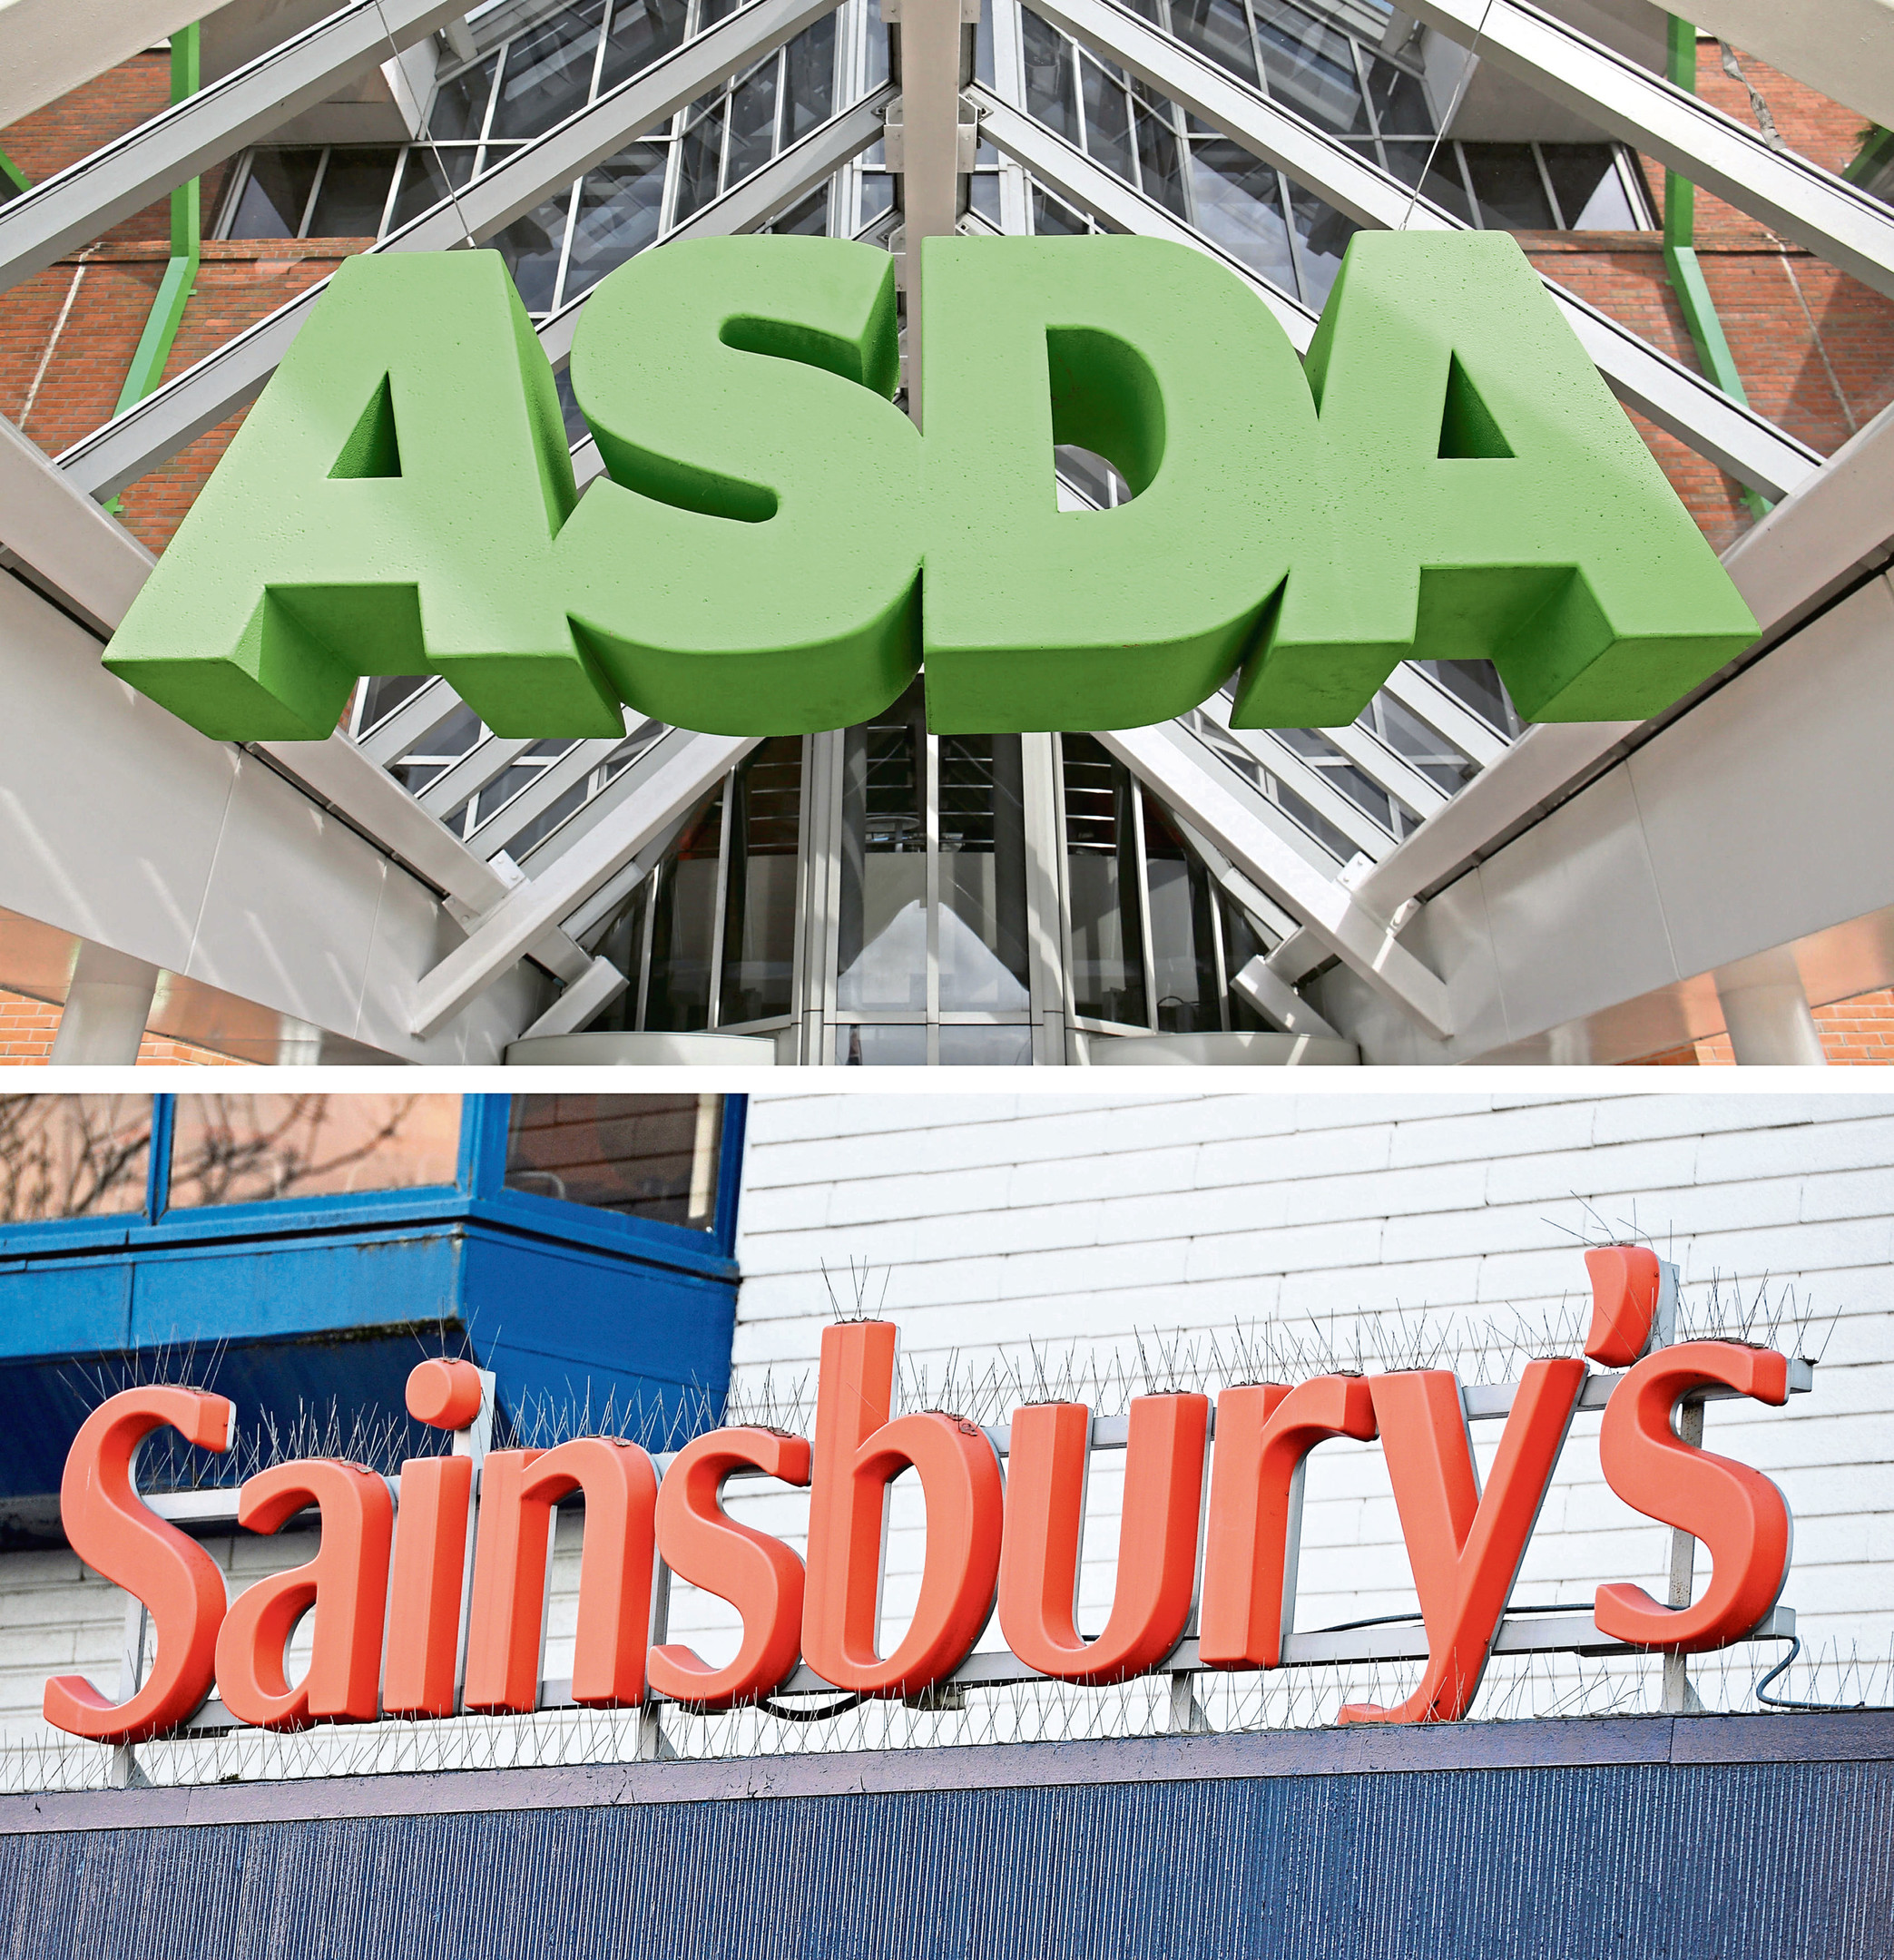 Undated file photos of an ASDA and a Sainsbury's sign. Britain's competition watchdog has launched the second stage of its investigation into the proposed £12 billion merger between the supermarkets. PRESS ASSOCIATION Photo. Issue date: Wednesday September 19, 2018. The deal will now be subject to a so-called Phase Two in-depth probe to assess how it could affect competition for UK shoppers, the Competition and Markets Authority (CMA) confirmed. See PA story CITY Sainsbury. Photo credit should read: Yui Mok/PA Wire